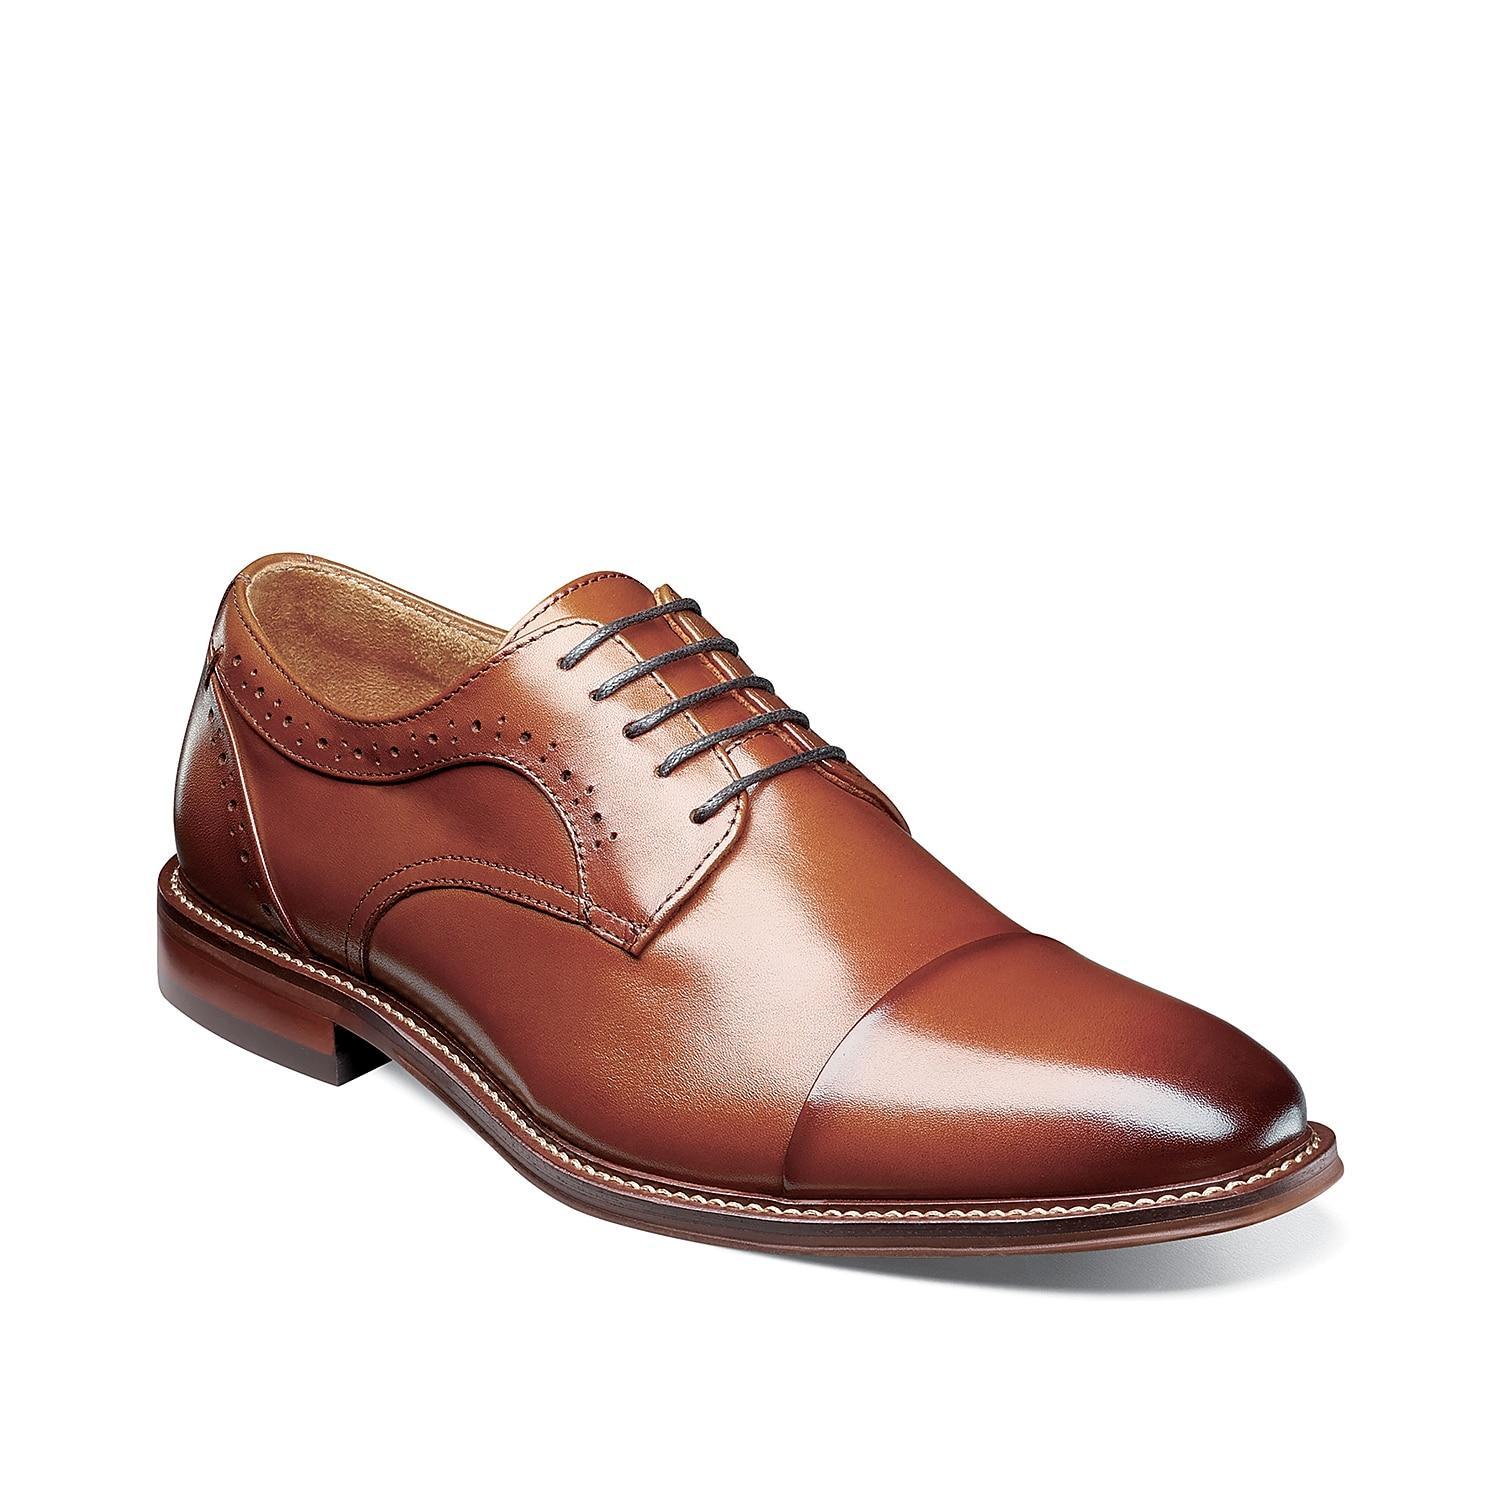 Stacy Adams Maddox Cap Toe Derby Product Image